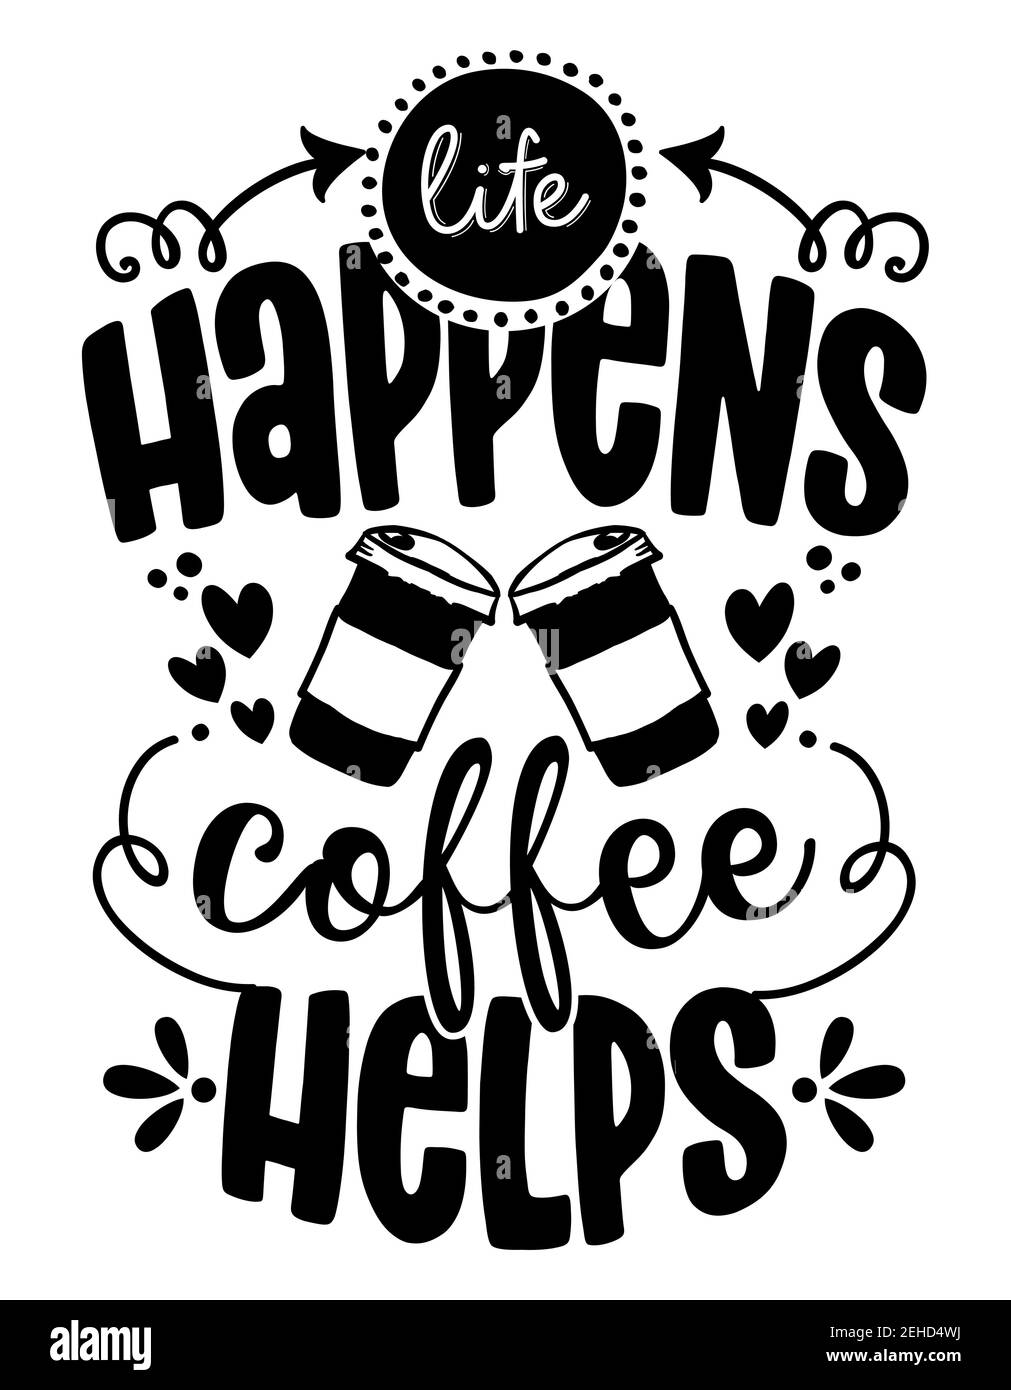 Stock Hand wall Coffee isolated decoration. Image shop calligraphy Art restaurant - Life helps painted coffee Alamy or happens, cards, Vector t-shirts, design for pen & brush - modern